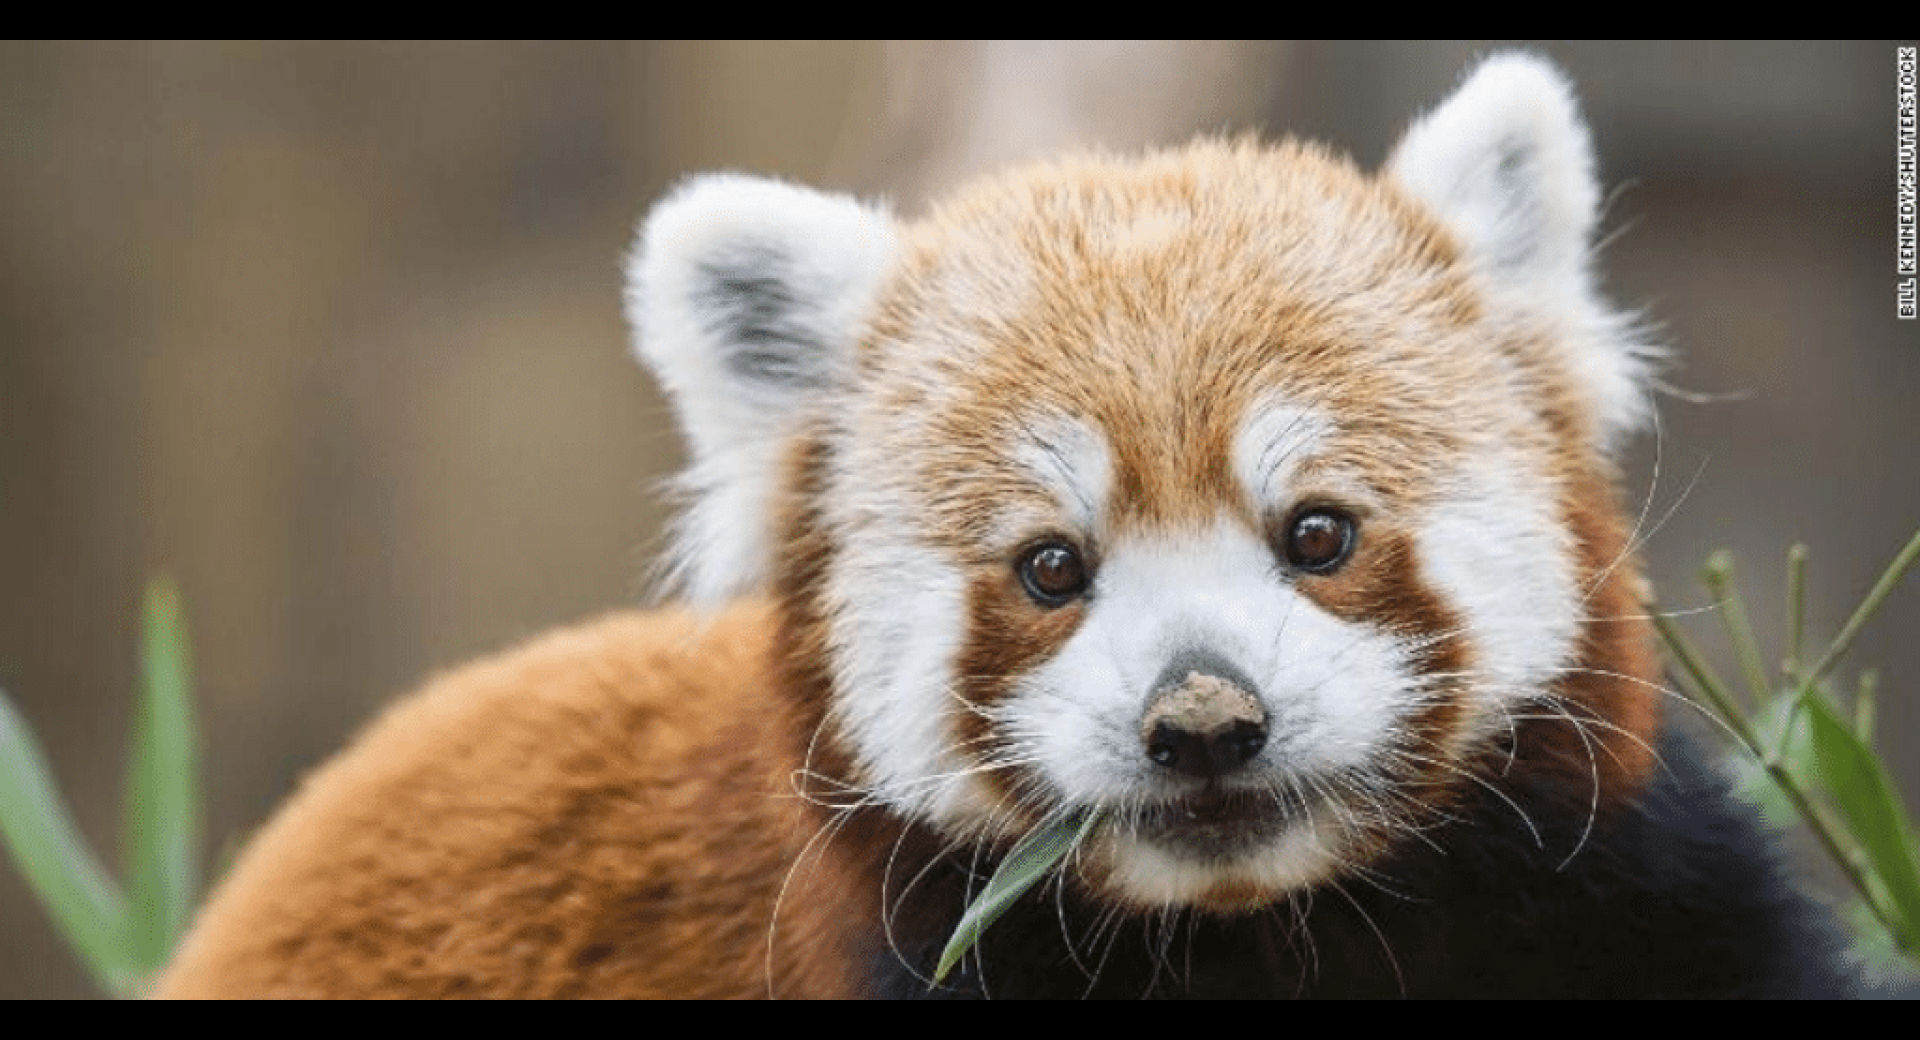 RPN Urges China to Upgrade Red Panda Conservation Status